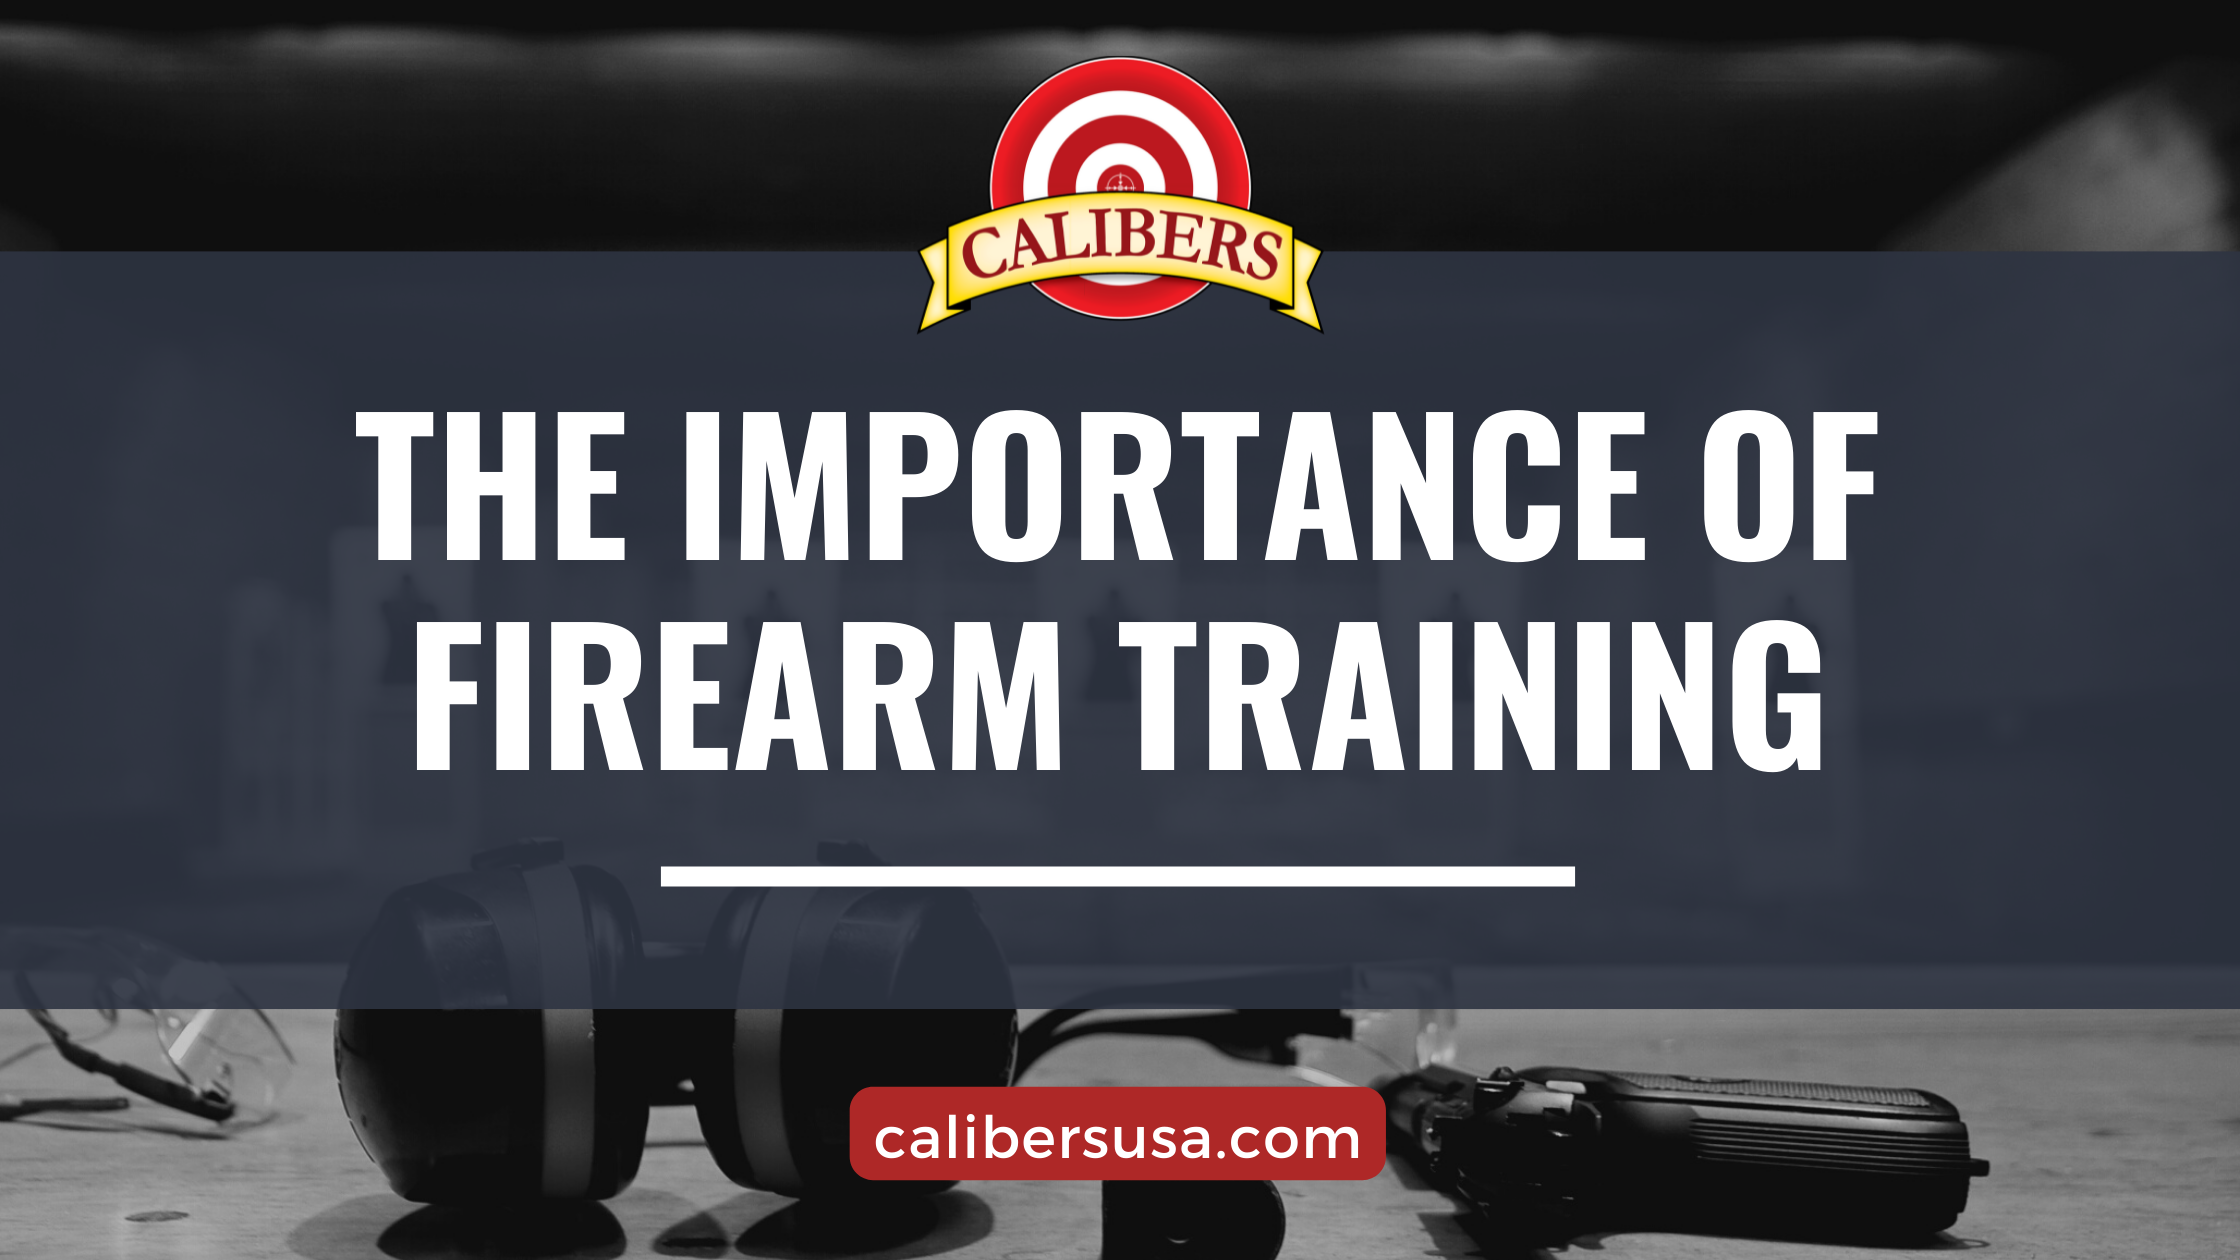 The Importance of Firearm Training